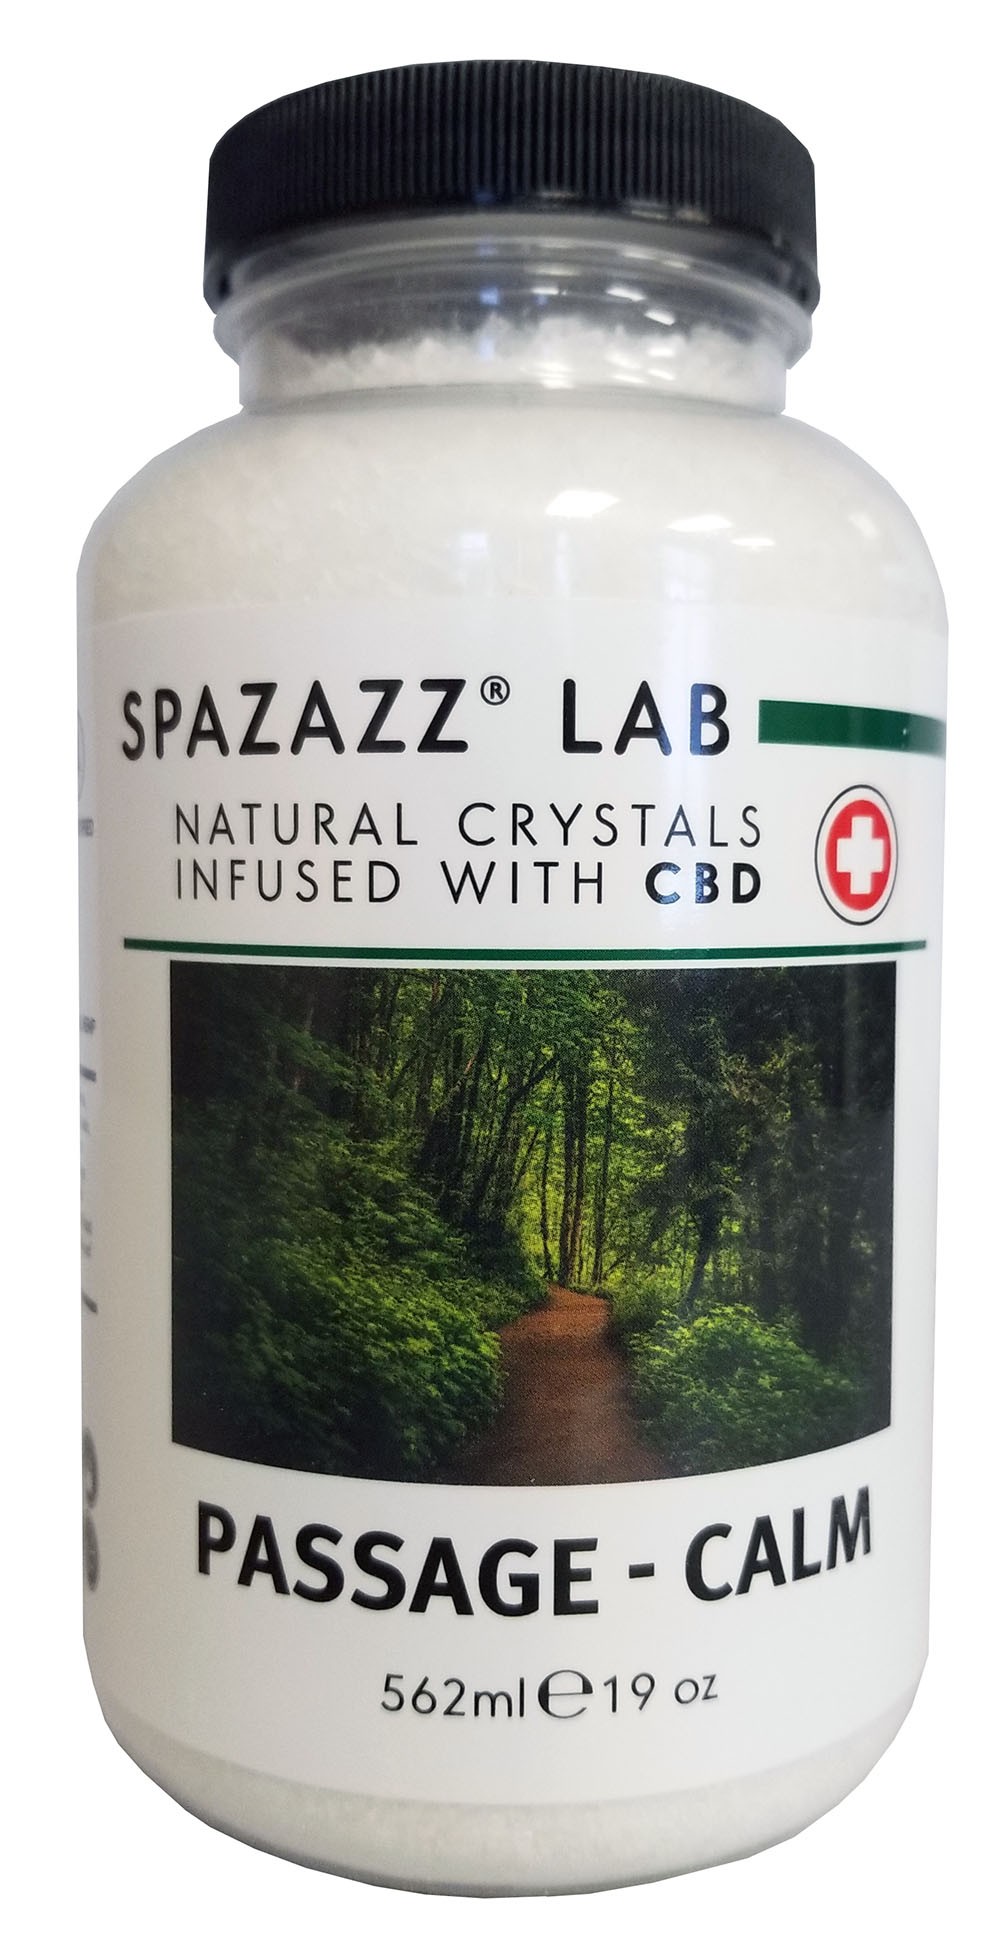 Spazazz Aromatherapy Spa and Bath Crystals Infused with CBD - Passage Calm 19oz